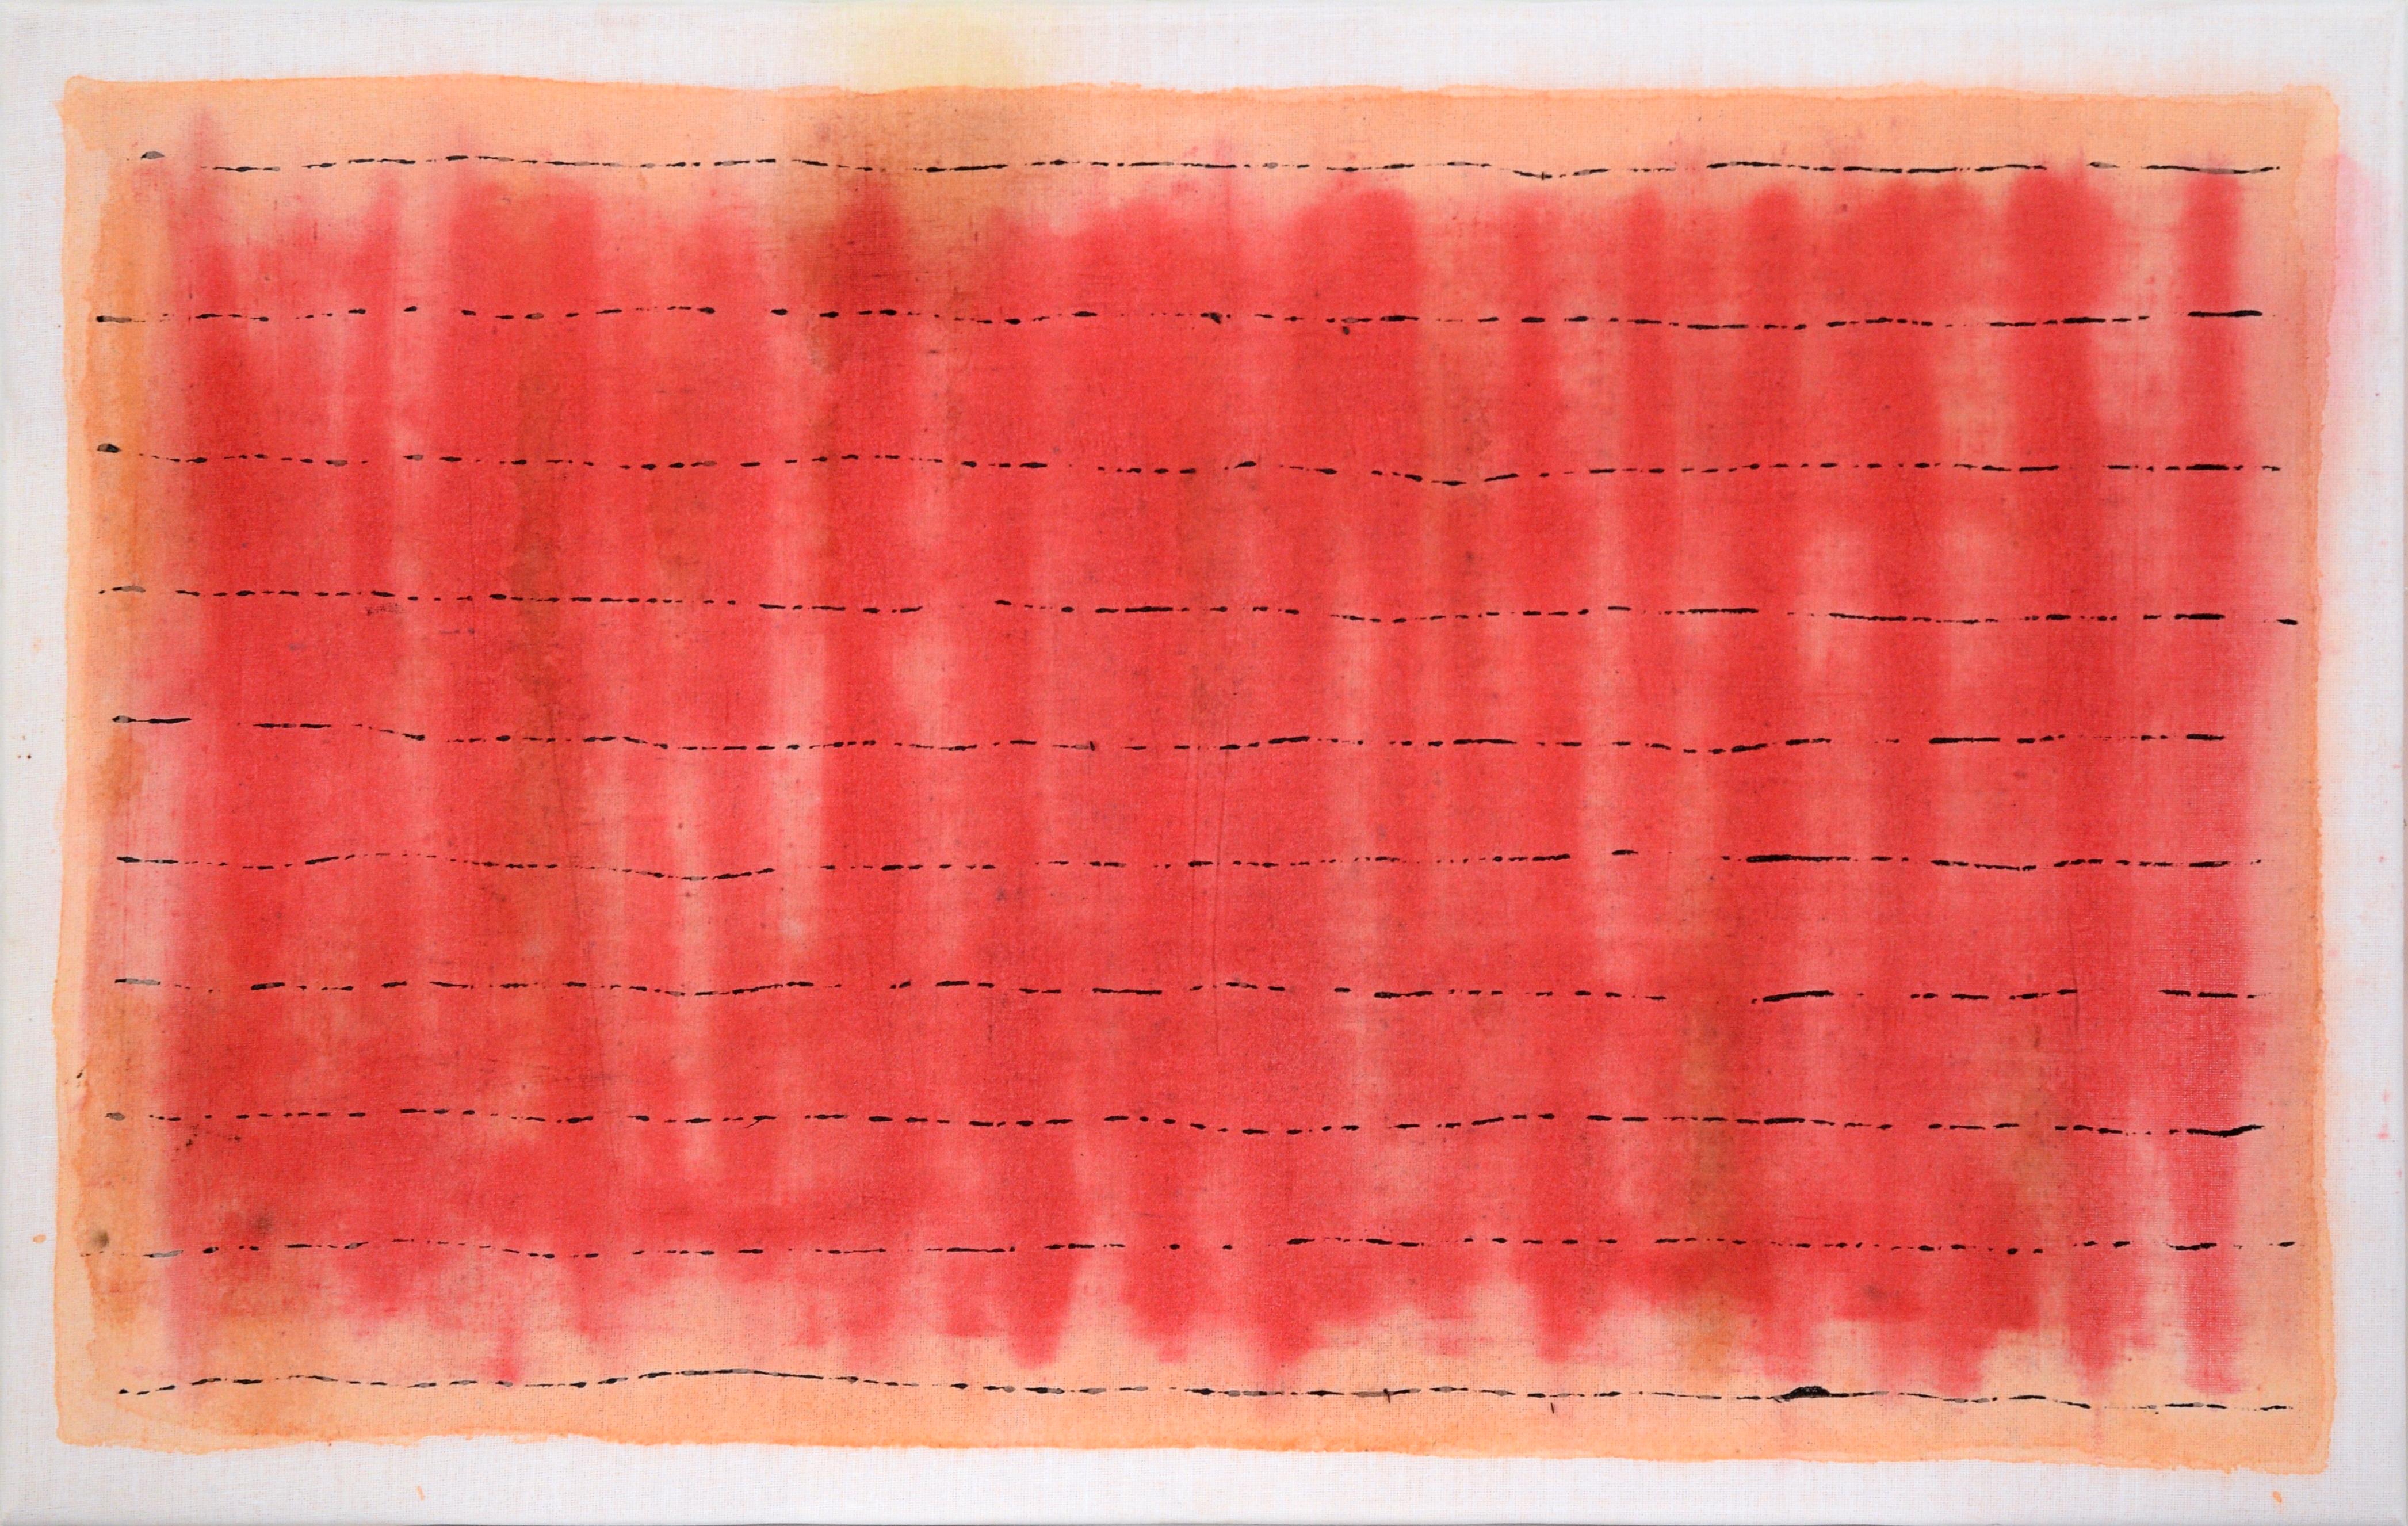 D Whalen Abstract Painting - Black Lines Across a Red Field - Abstract Composition on Starched Linen